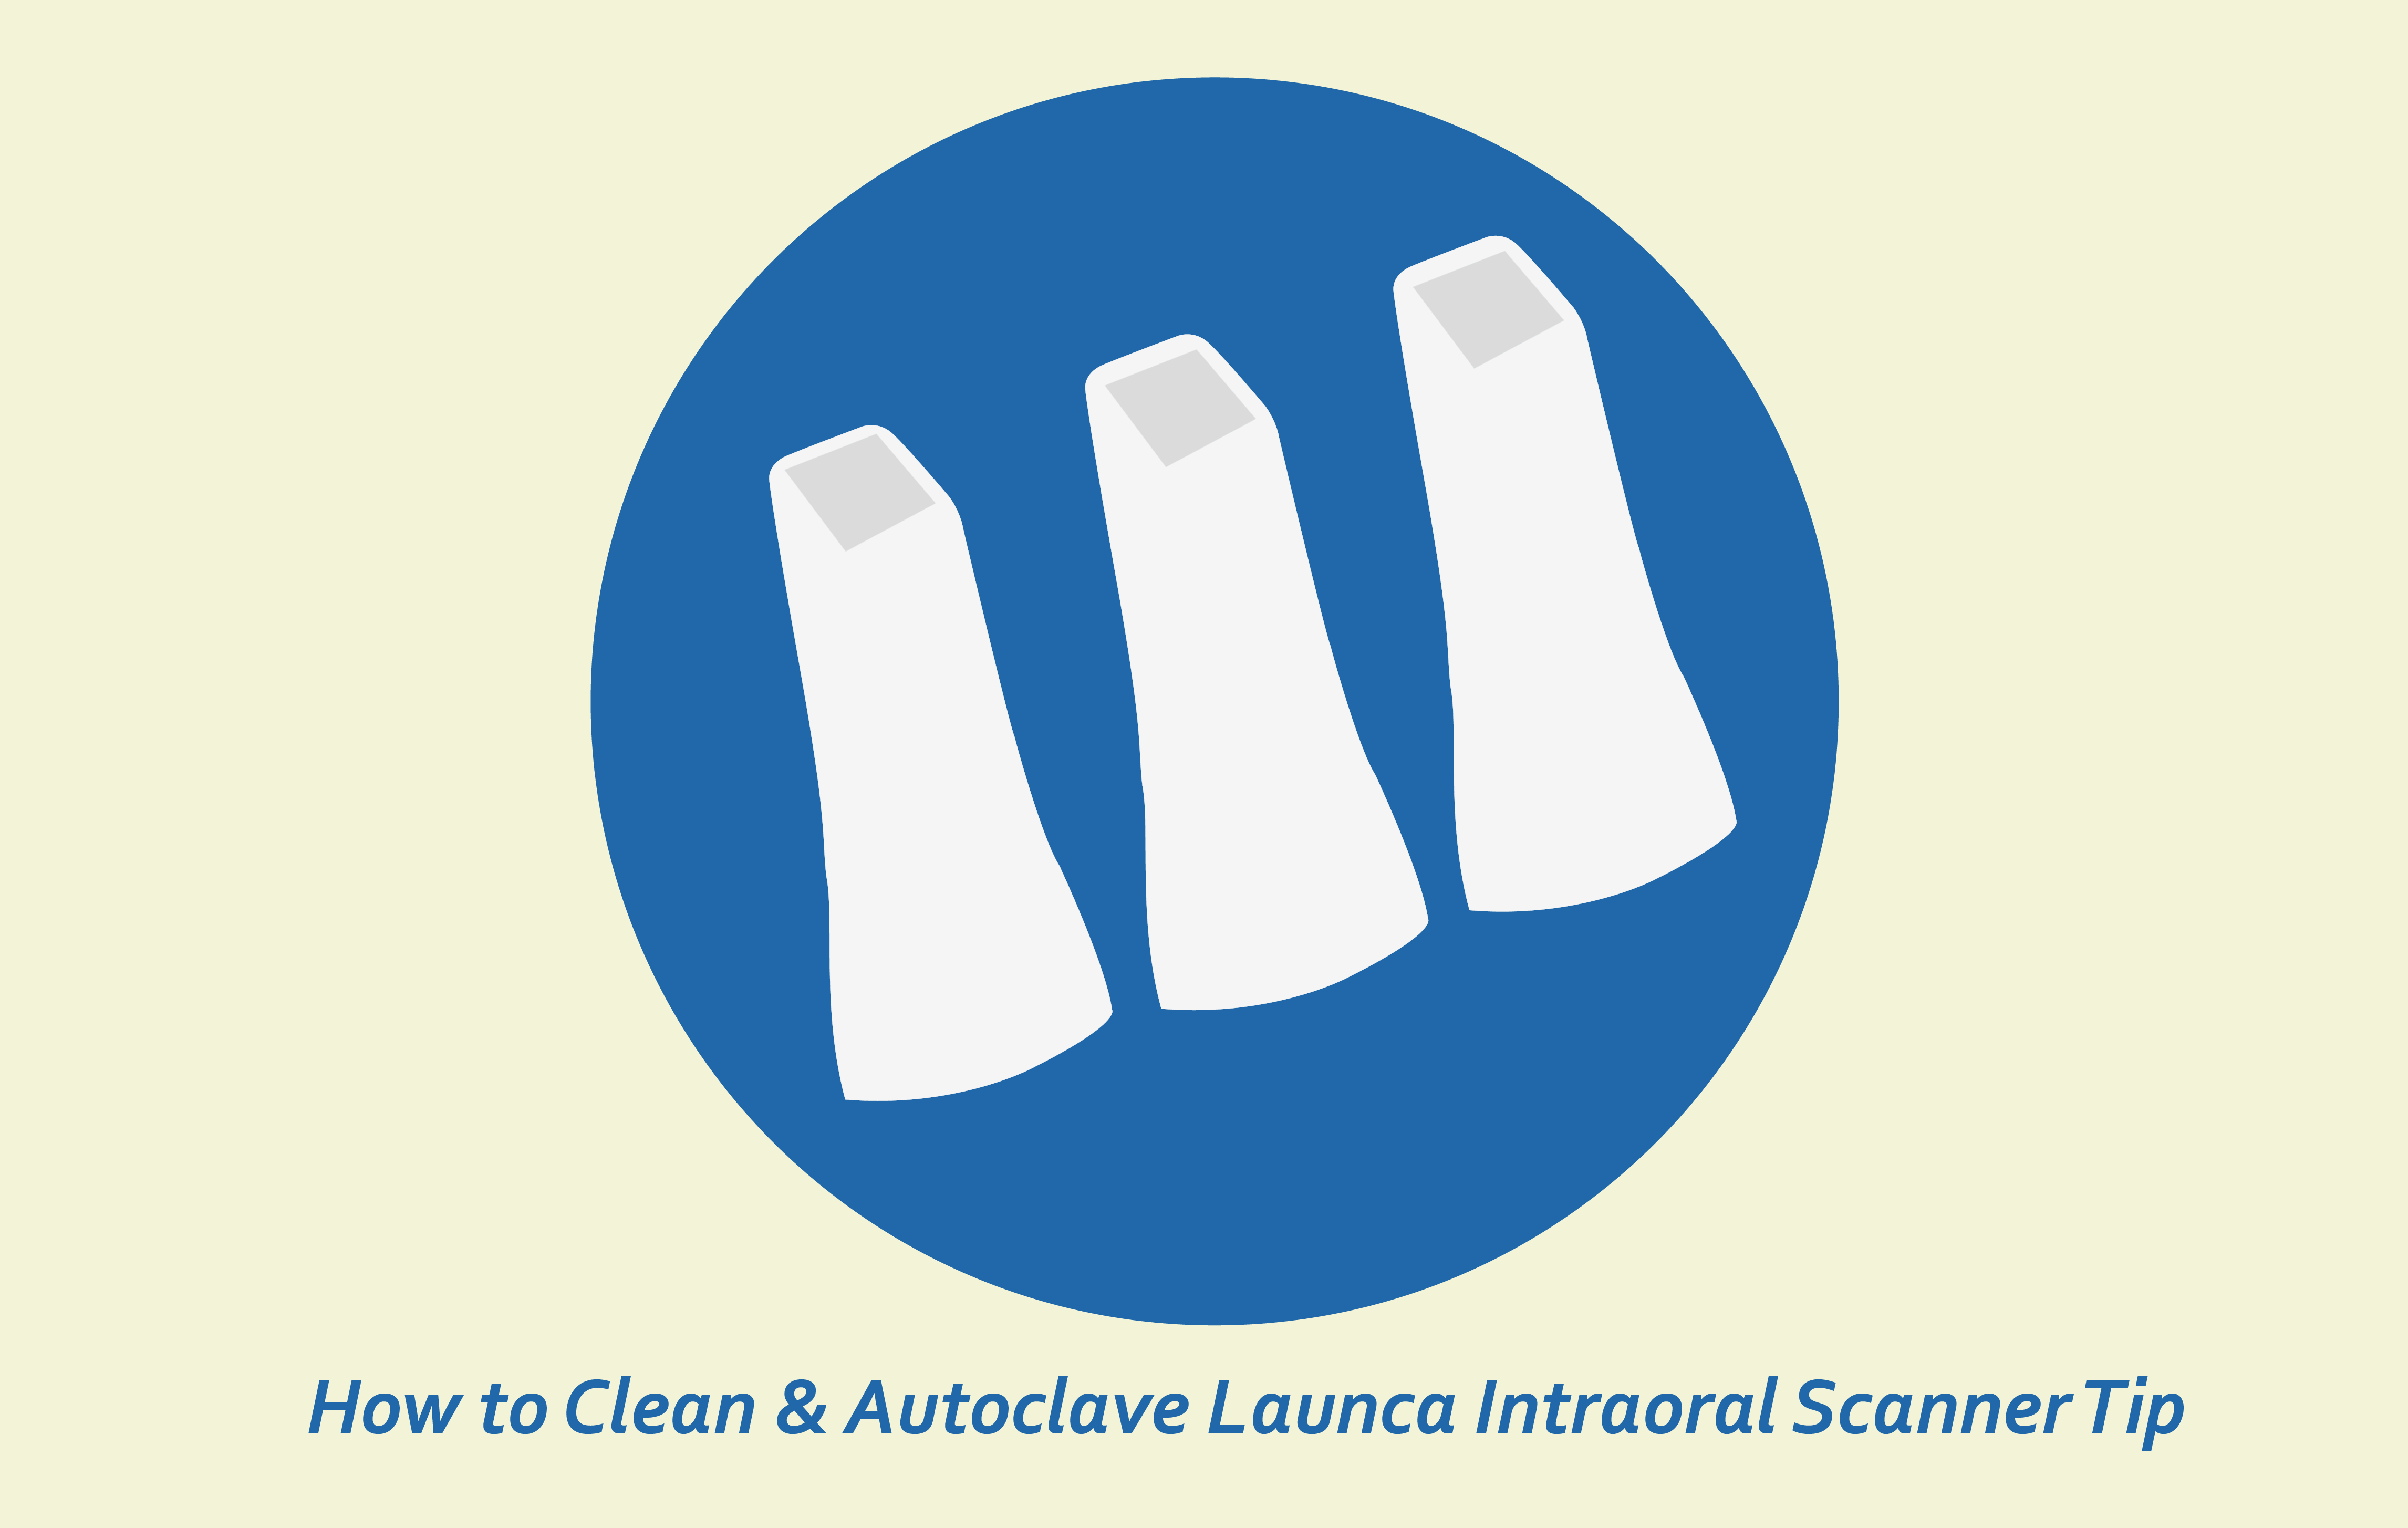 How to Clean & Sterilize Launca Intraoral Scanner Tips